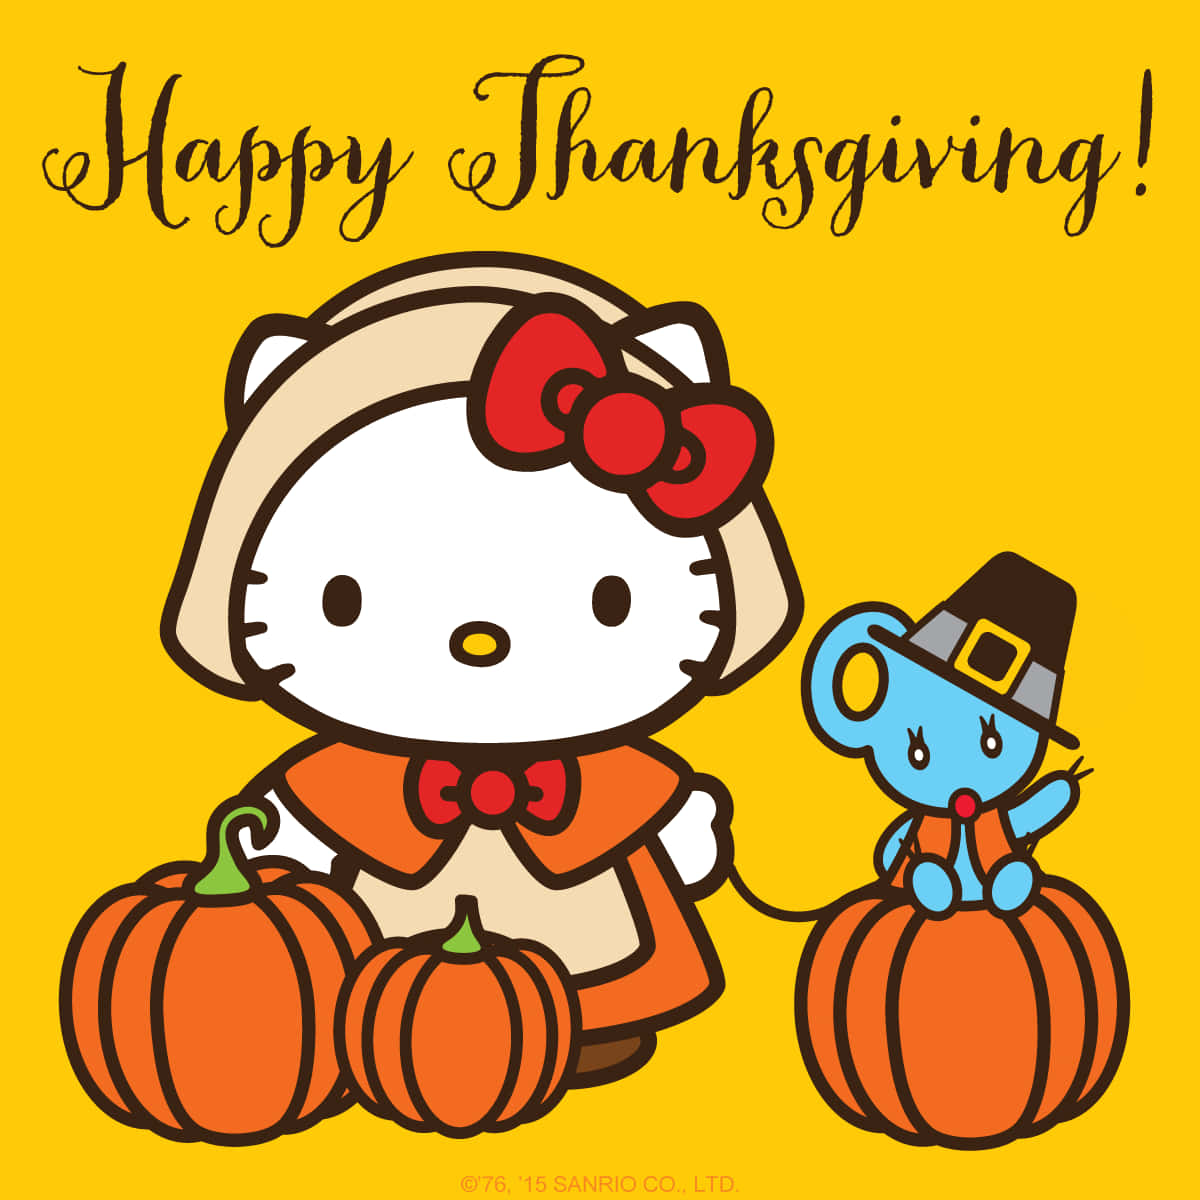 Wishing You A Happy And Healthy Hello Kitty Thanksgiving! Background